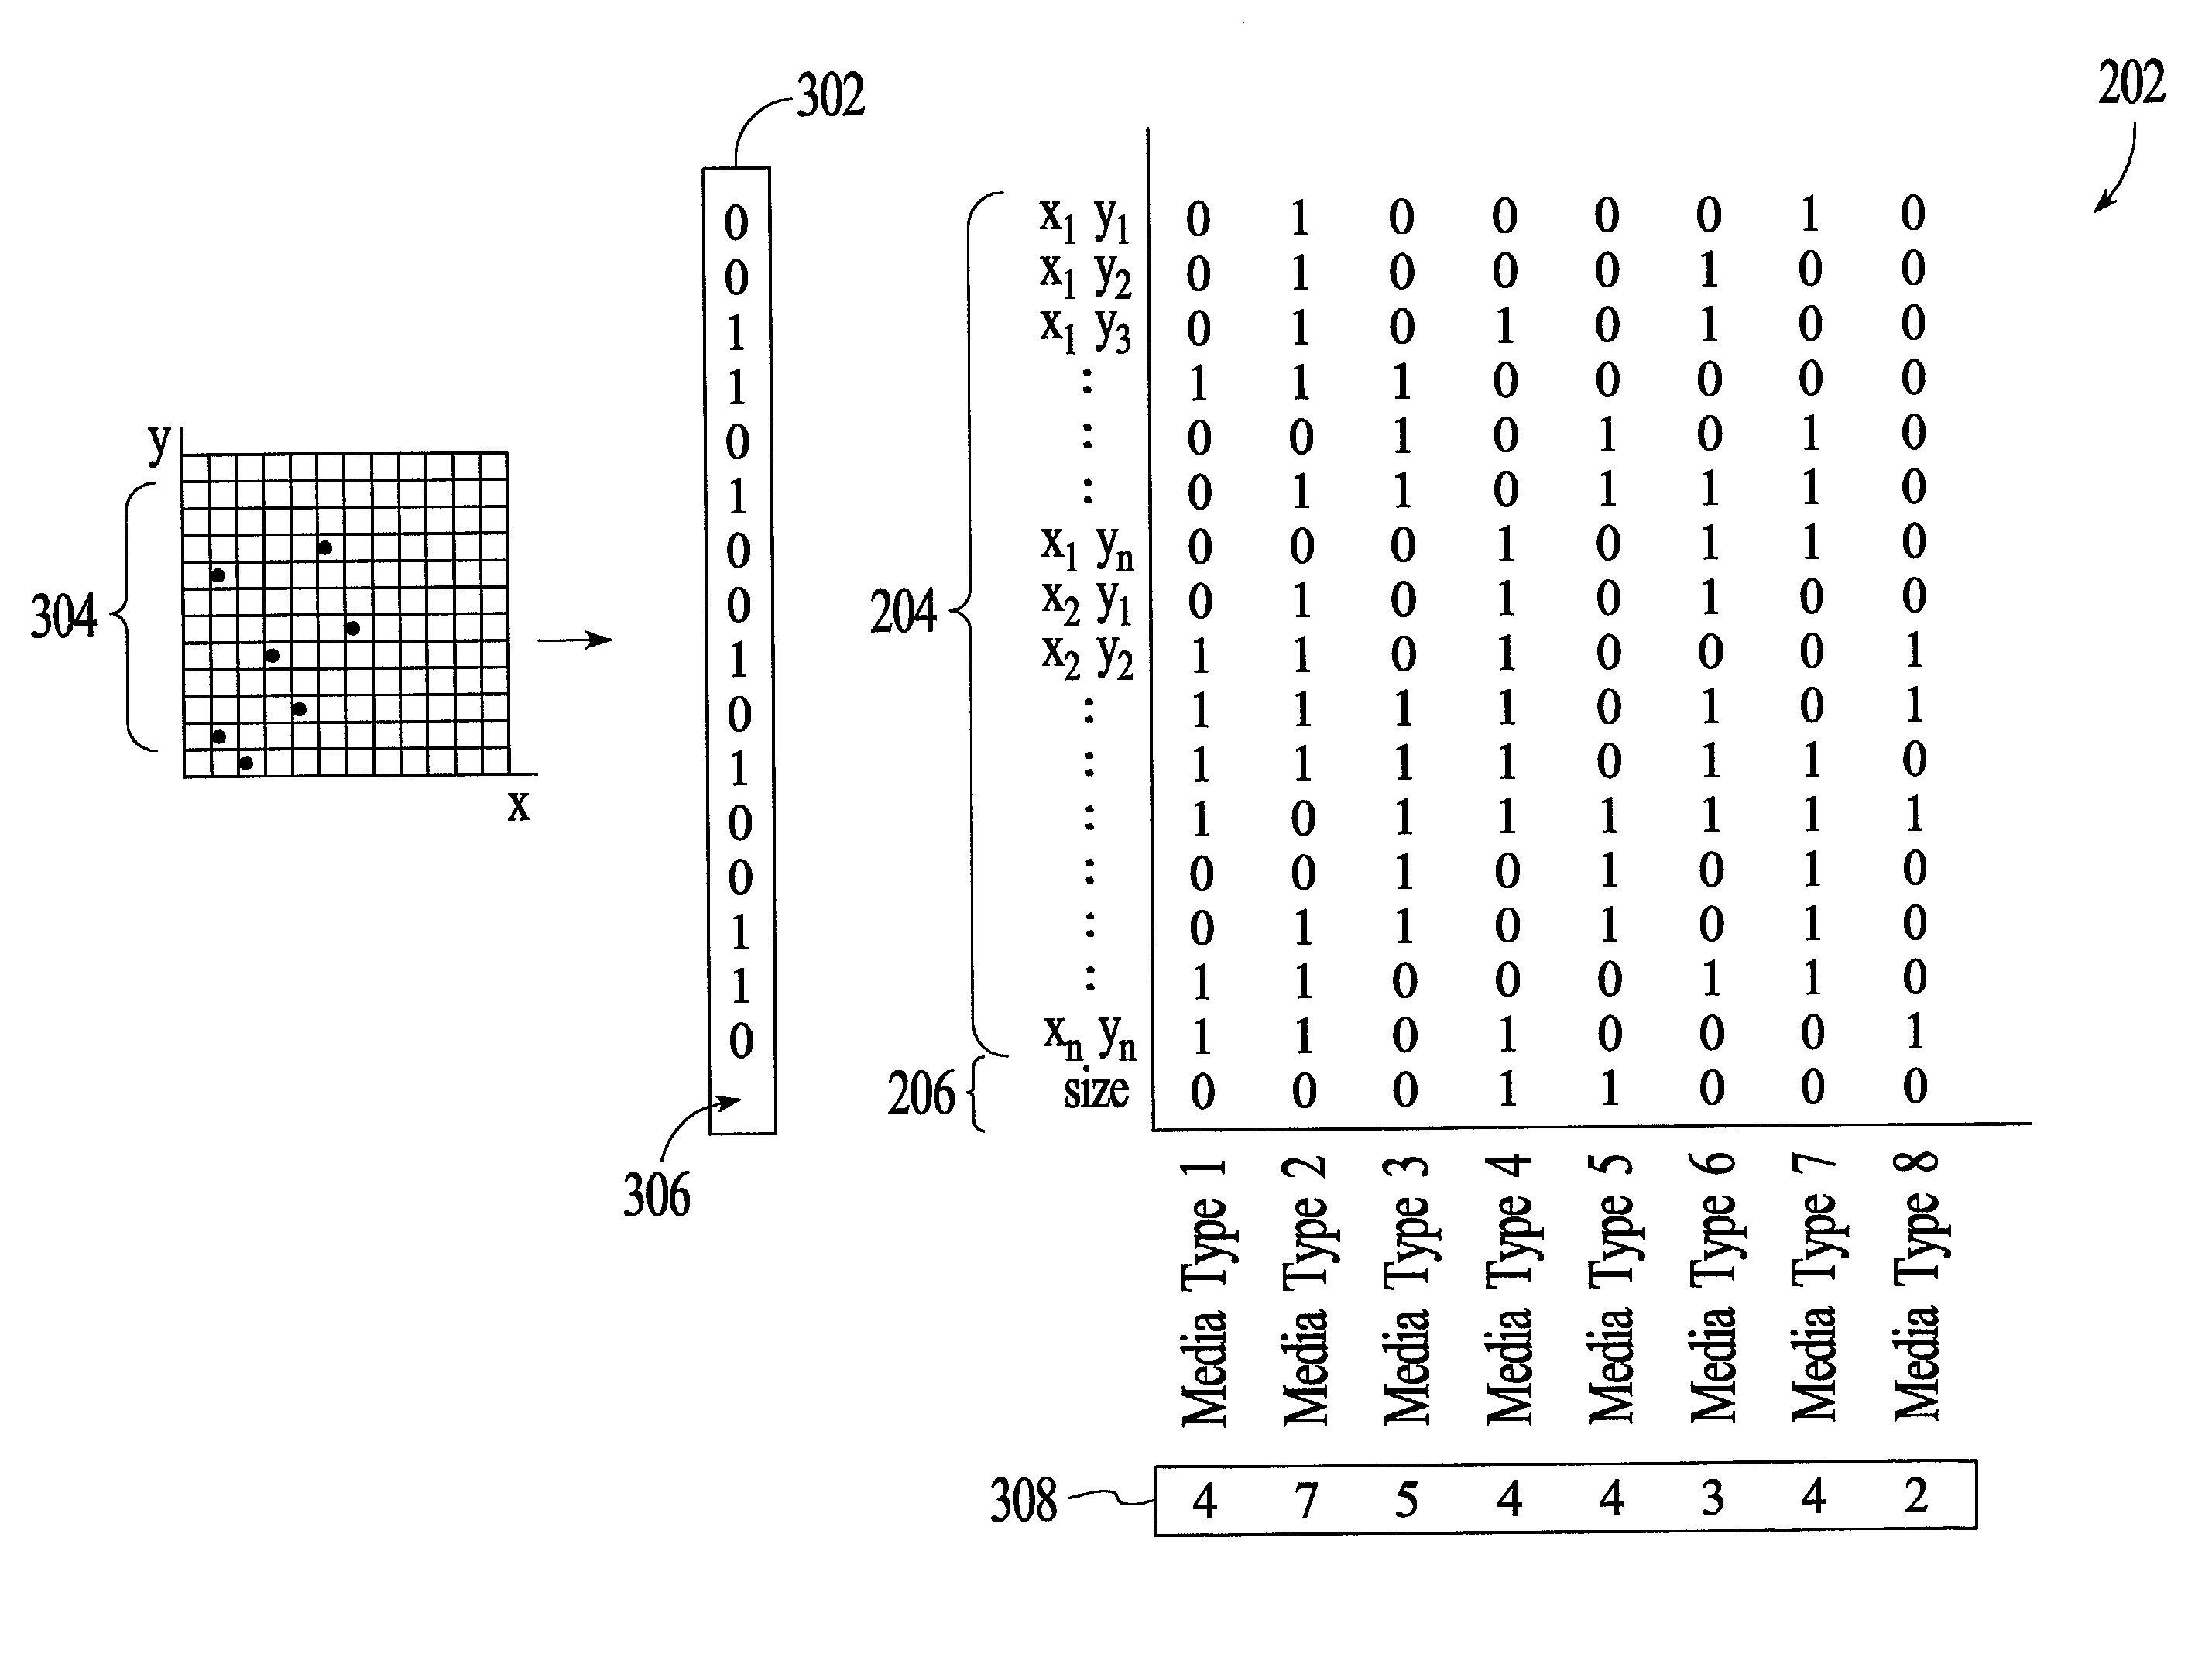 System and method for color correcting electronically captured images by determining input media types using color correlation matrix